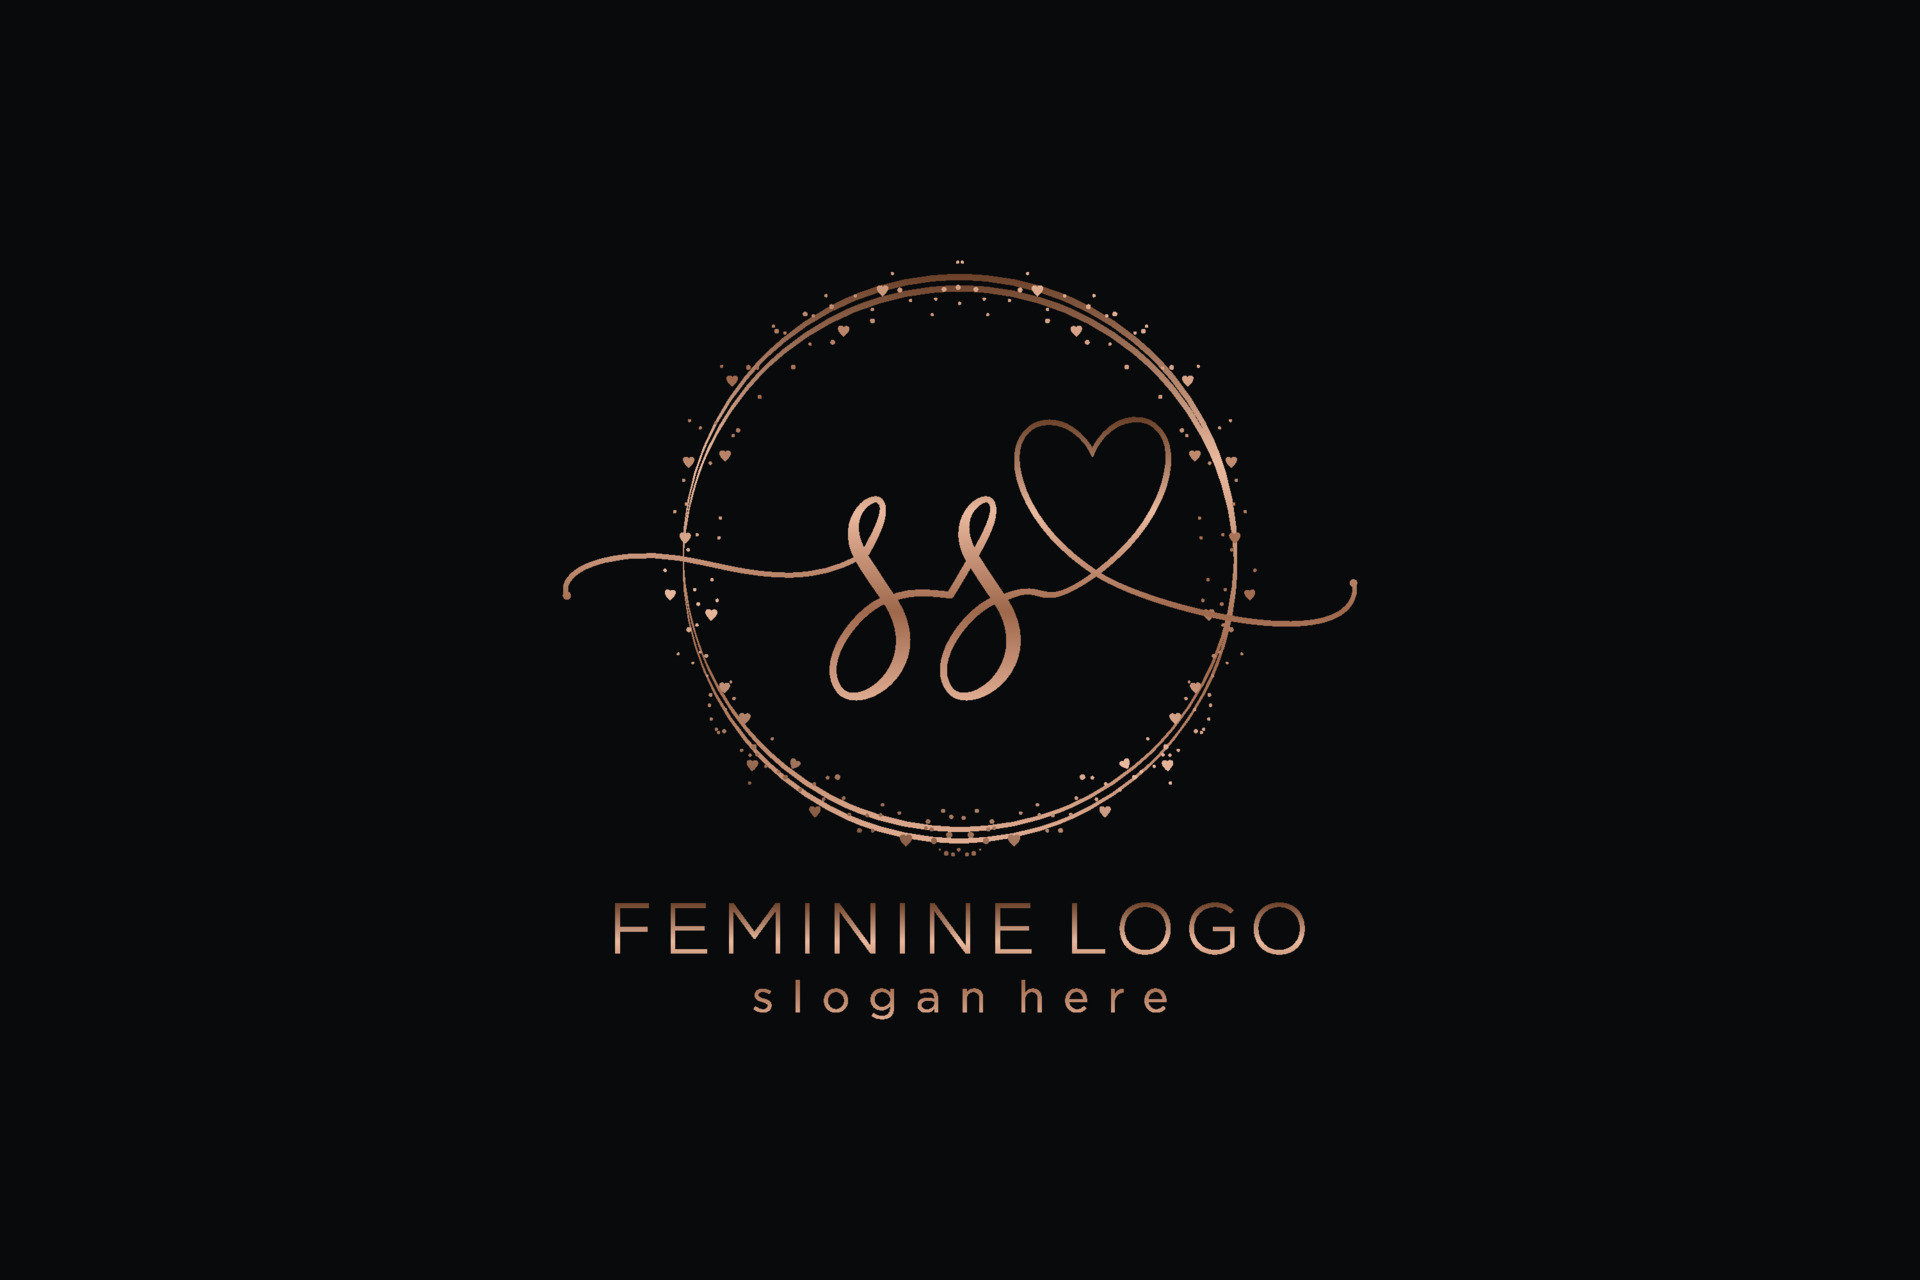 The 5 Logo Styles - What's Yours? - The Logo Company